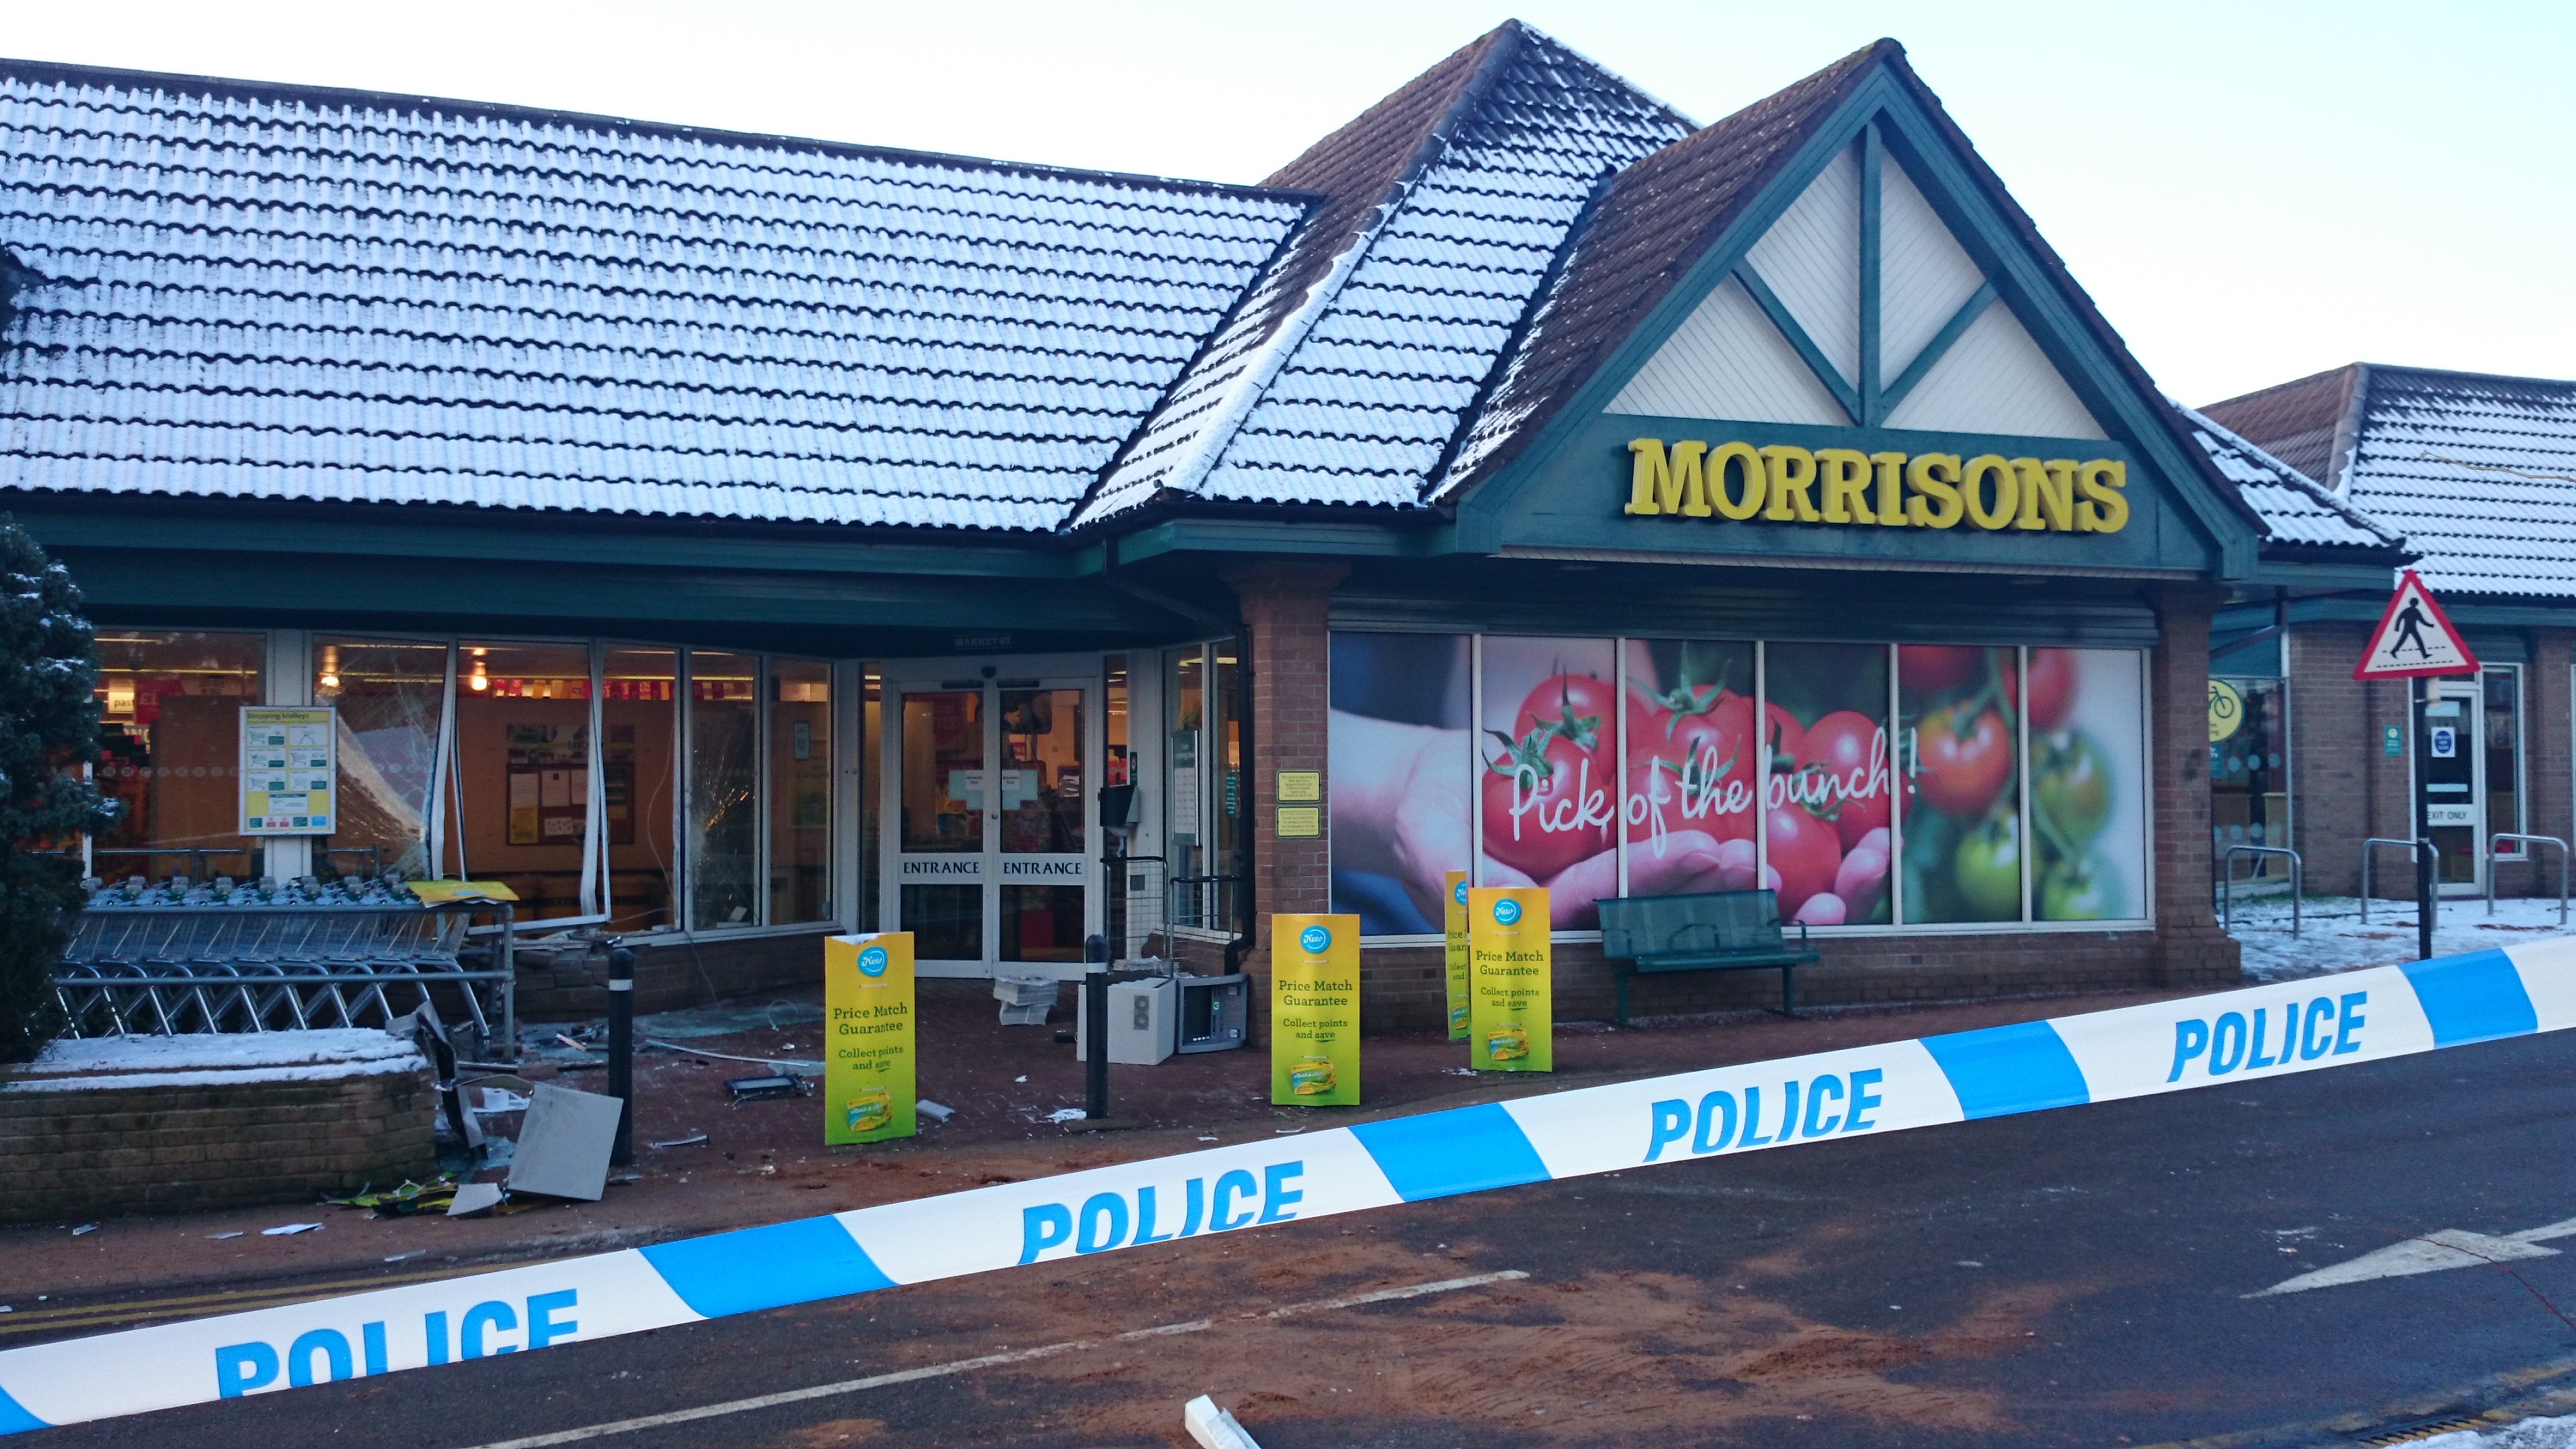 The ATM theft at Morrisons in Banchory